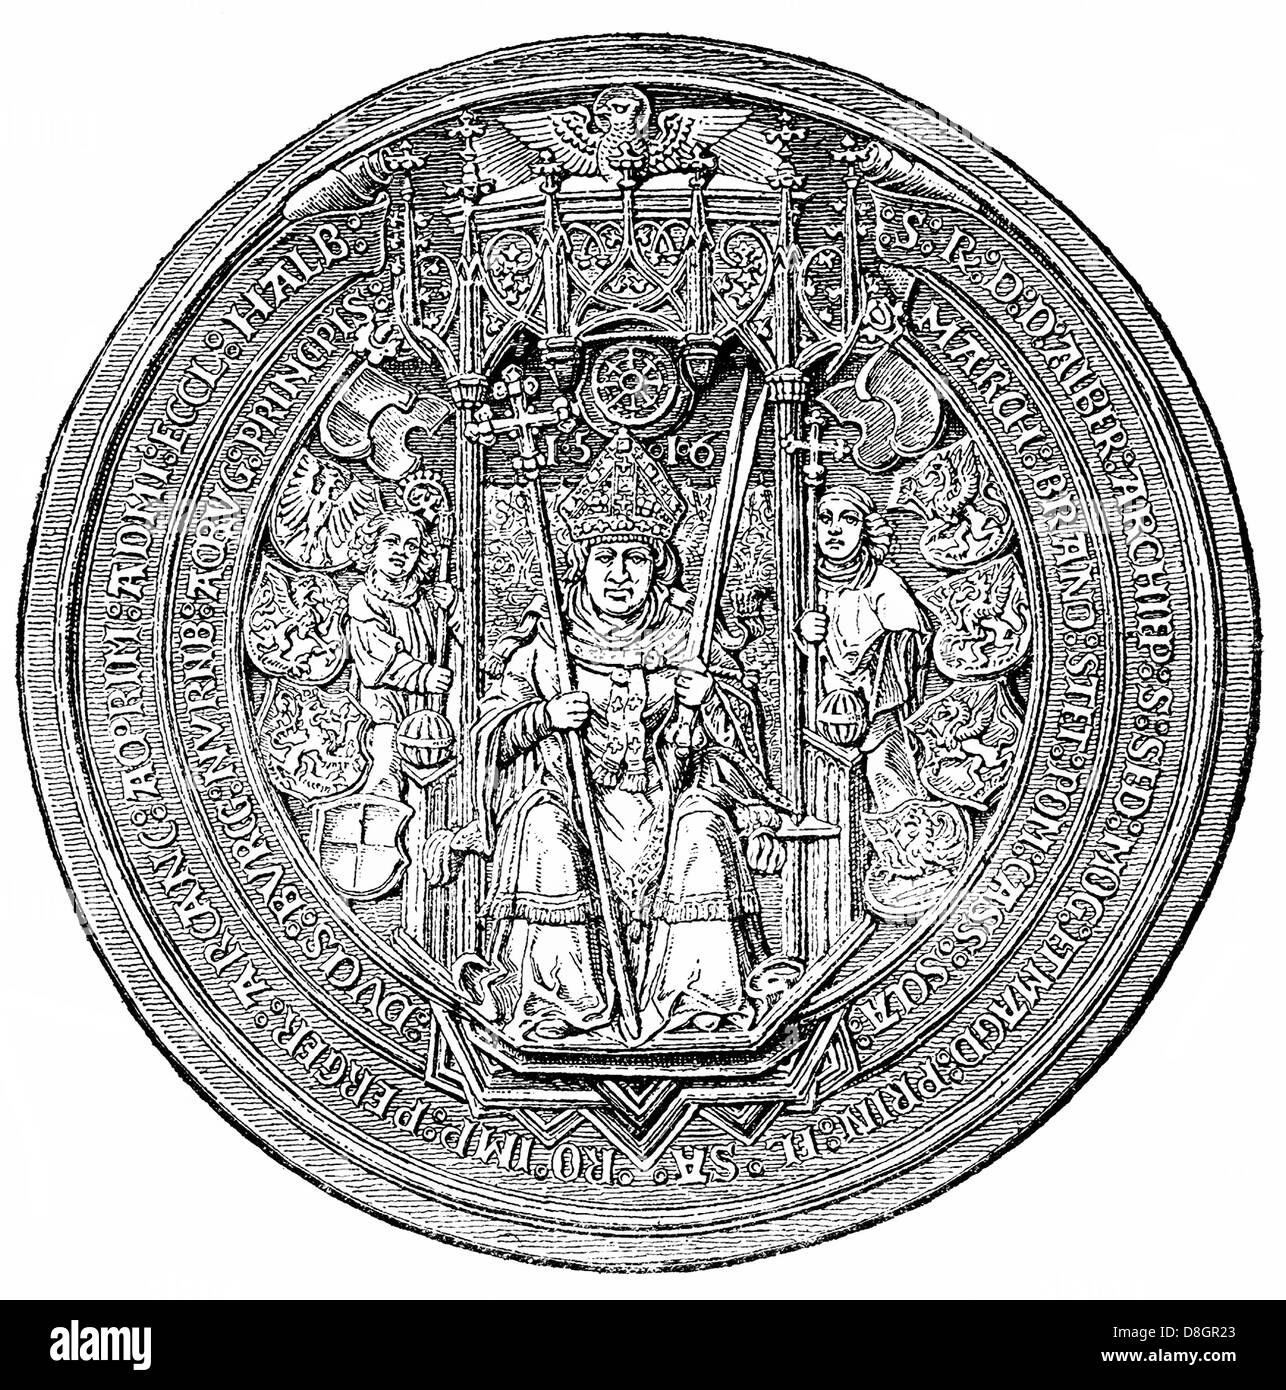 Seal of Albrecht von Hohenzollern, 1490 - 1545, Elector and Archbishop of Mainz from and Archbishop of Magdeburg, Stock Photo